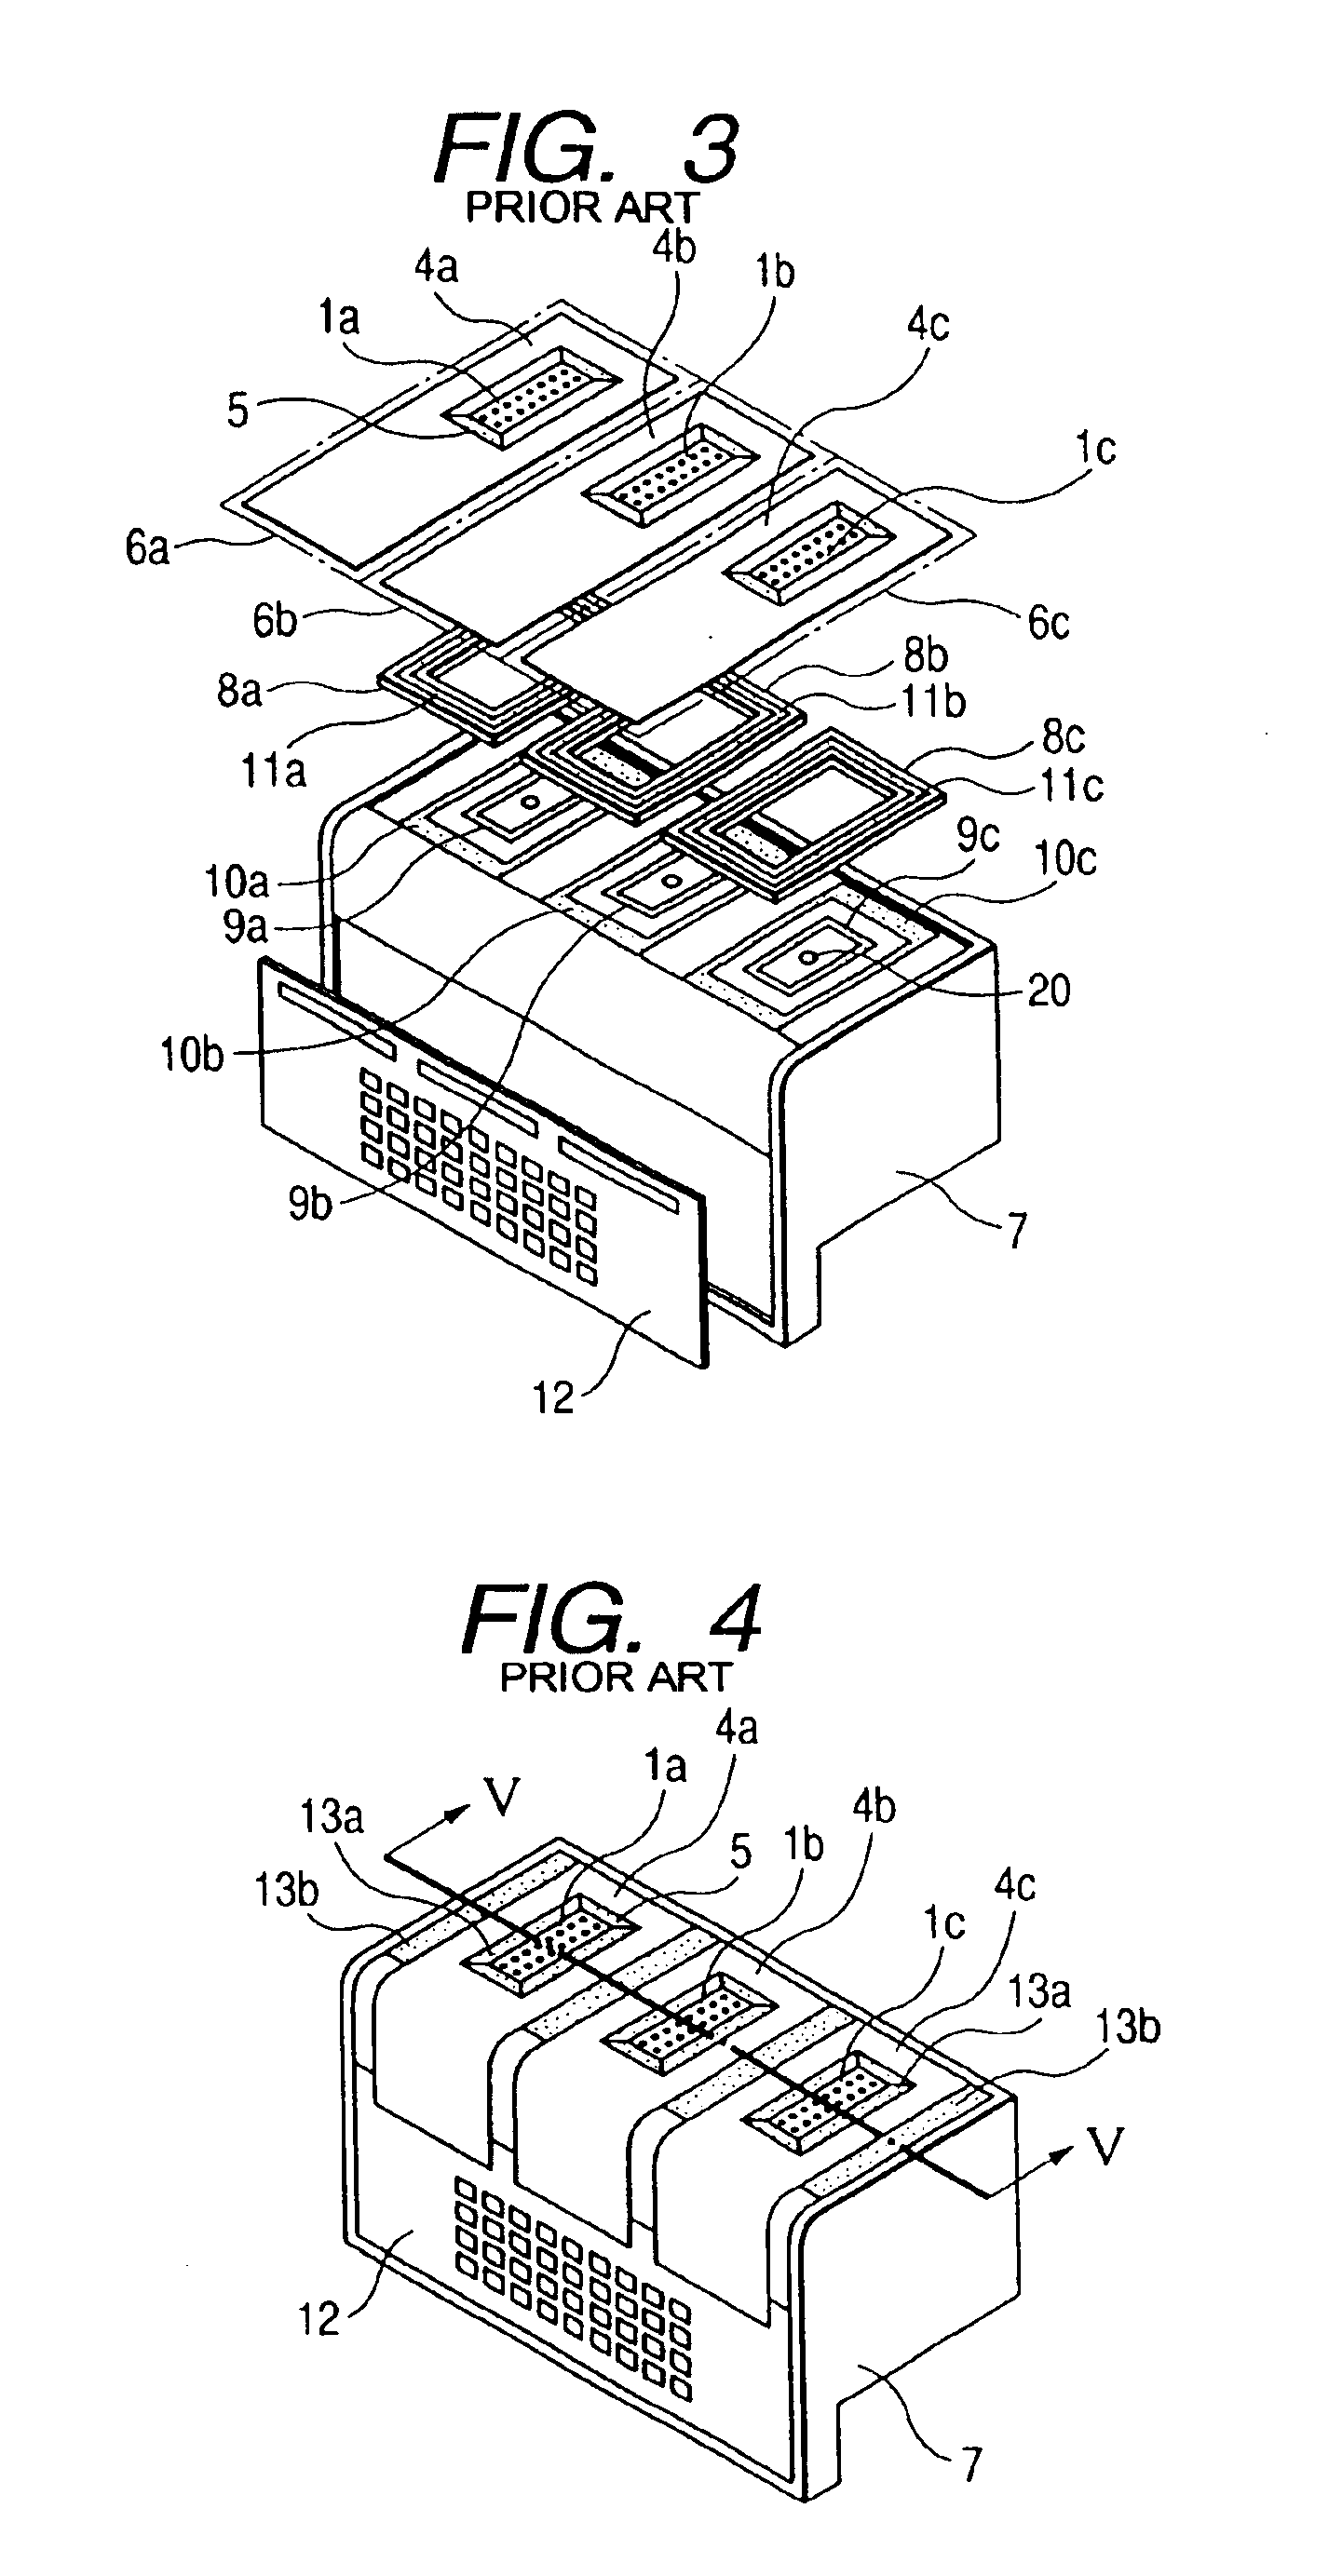 Method for manufacturing an ink jet recording head, an ink jet recording head manufactured by such method of manufacture, and an ink jet recording apparatus having such ink jet recording head mounted thereon